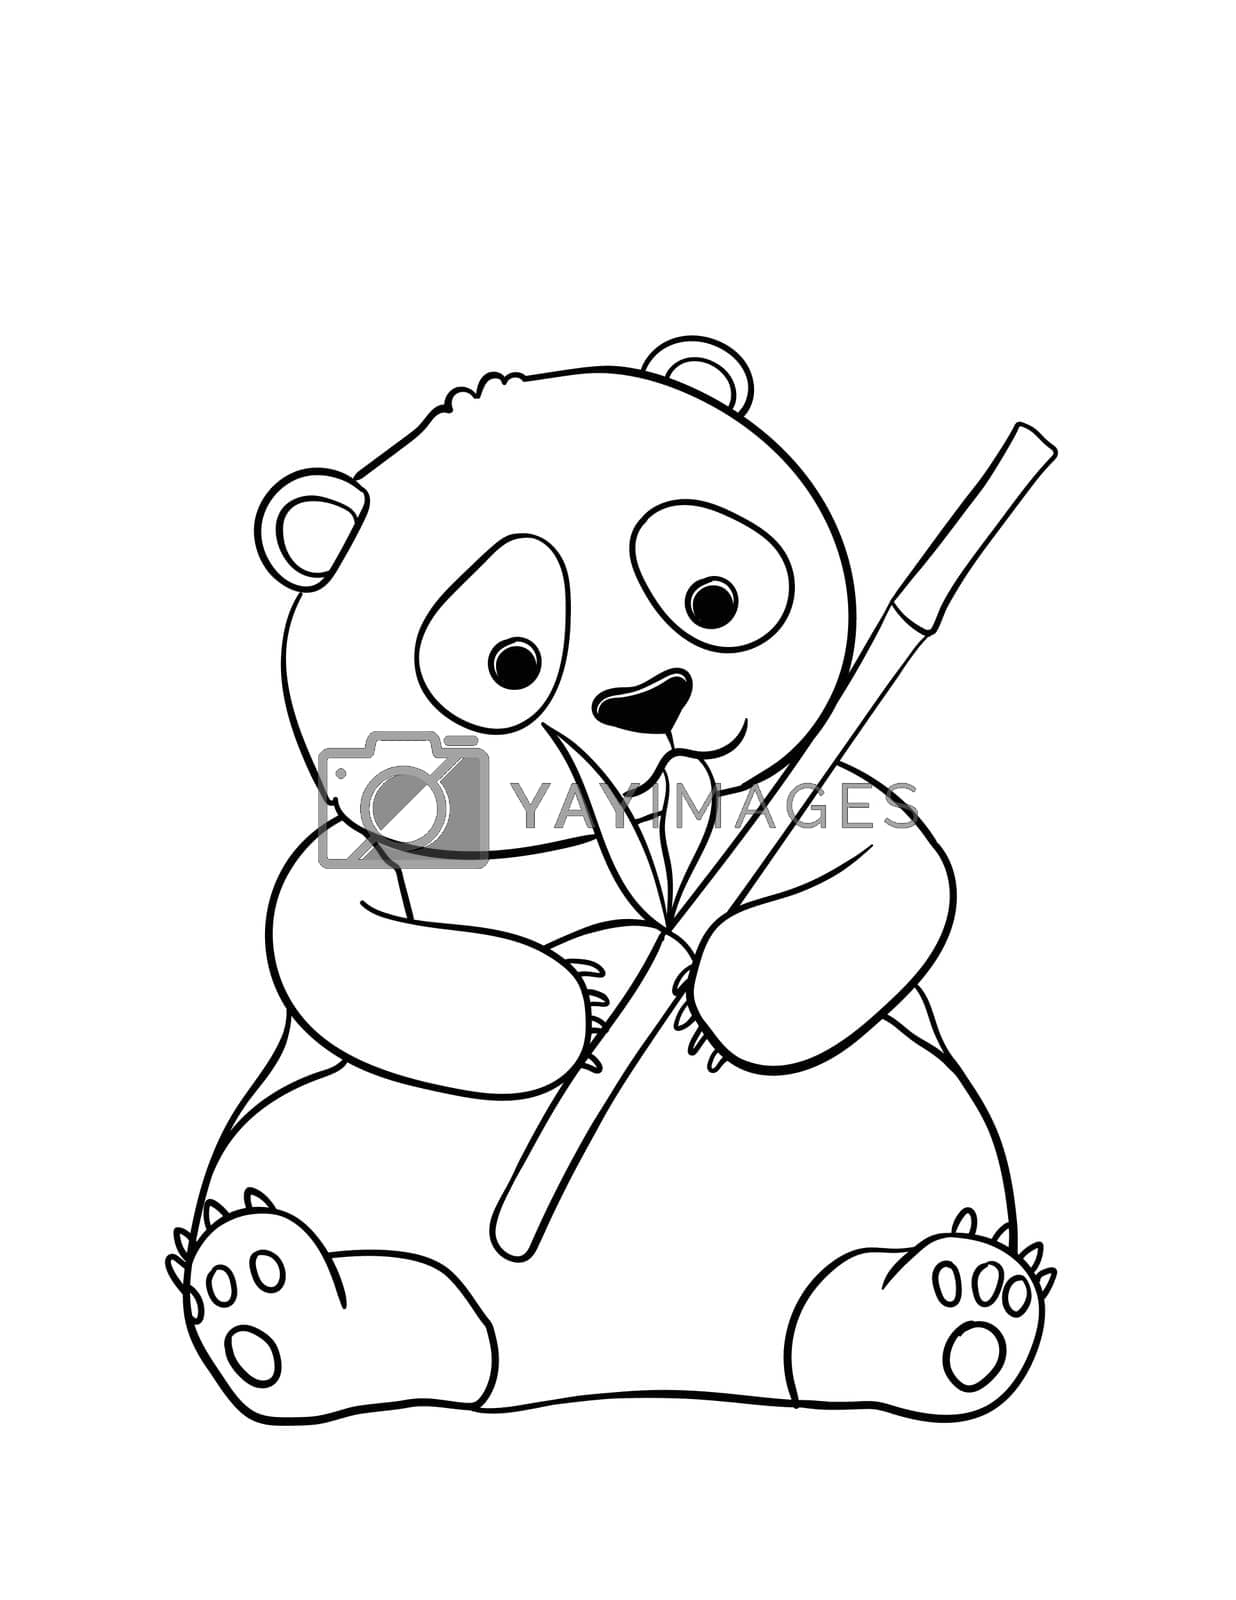 Royalty free image of Panda Isolated Coloring Page for Kids by abbydesign